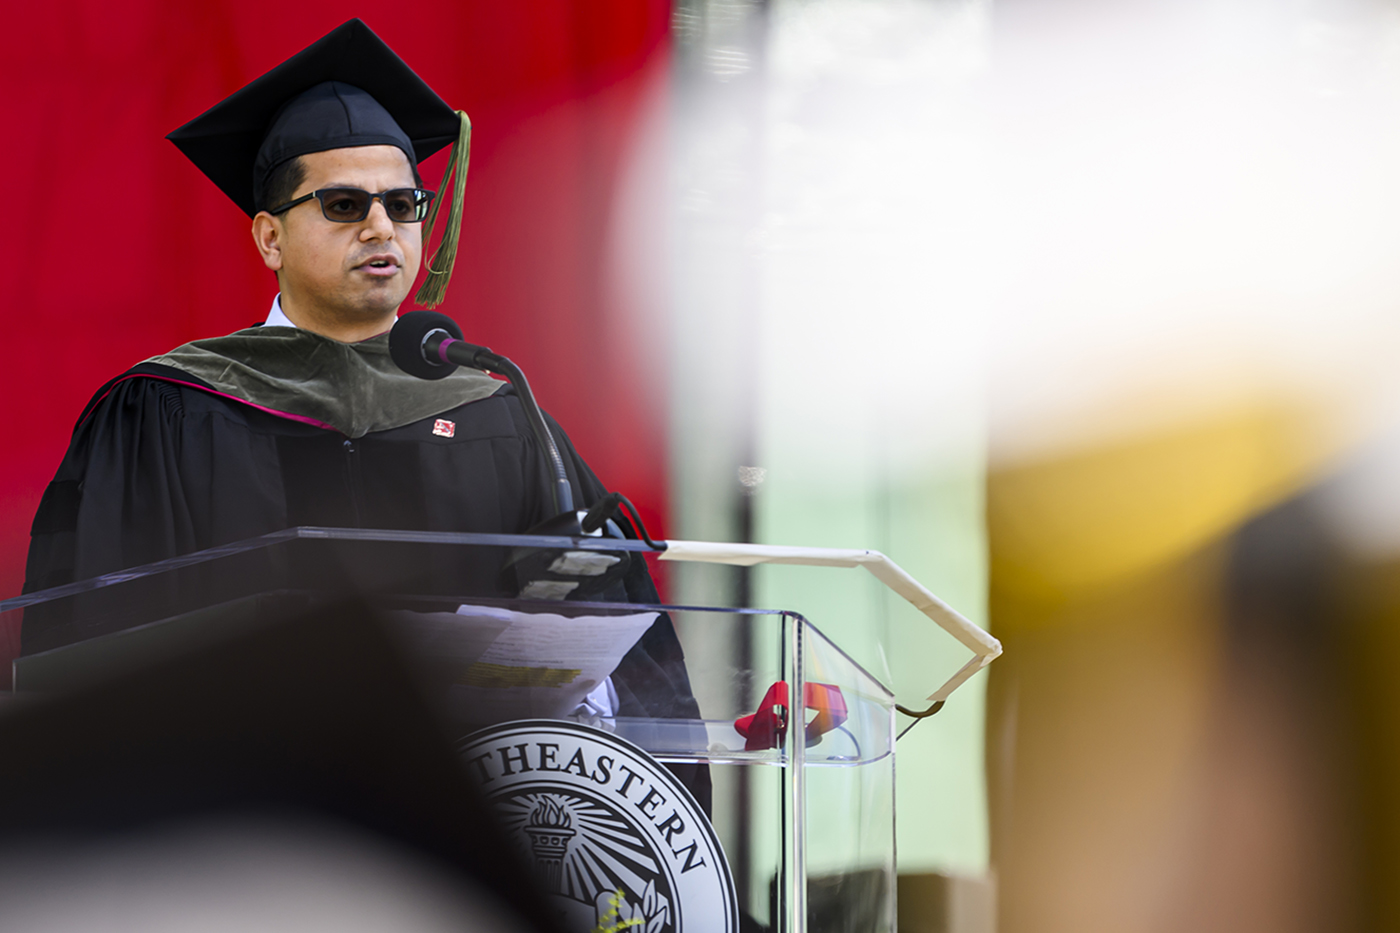 Paresh Kumar speaking at graduate commencement ceremony at Fenway Park